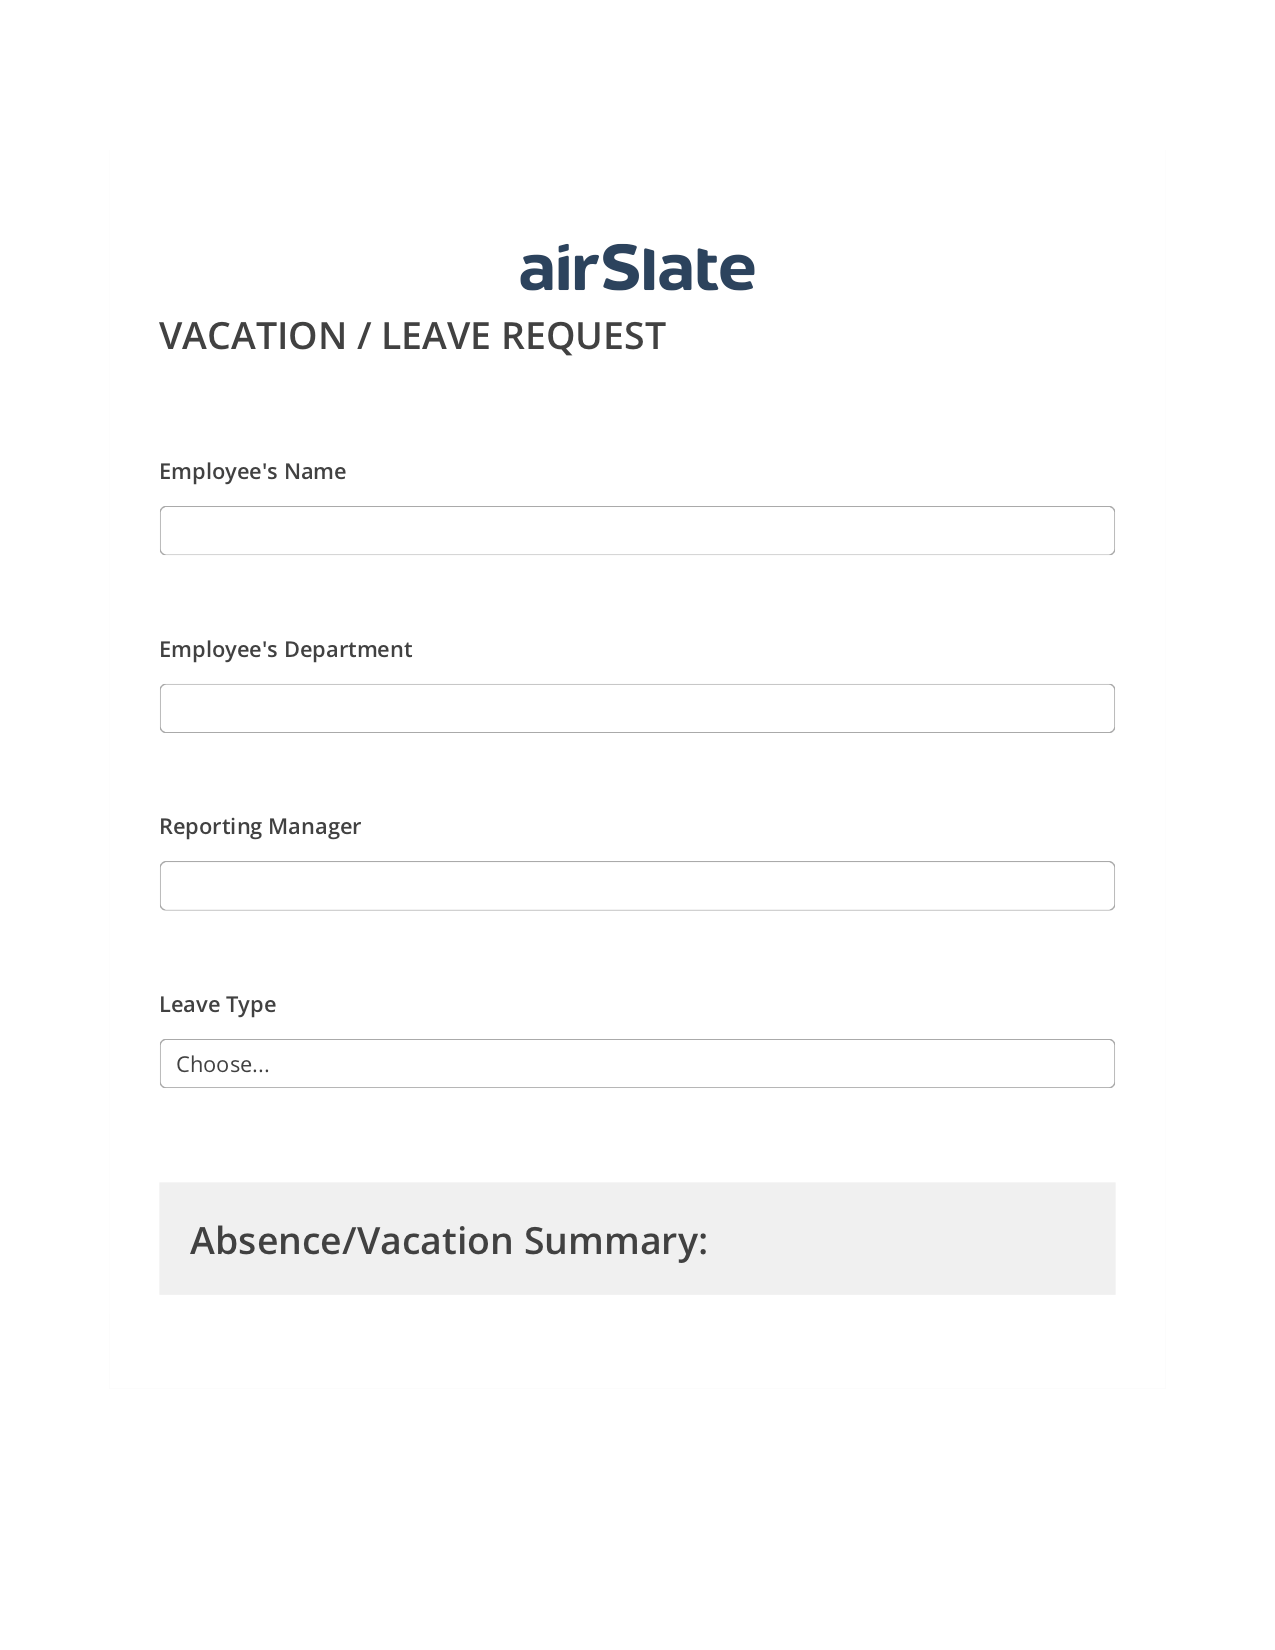 Multirole Vacation/Leave Request Workflow Pre-fill Dropdowns from Airtable, Add Tags to Slate Bot, Archive to OneDrive Bot